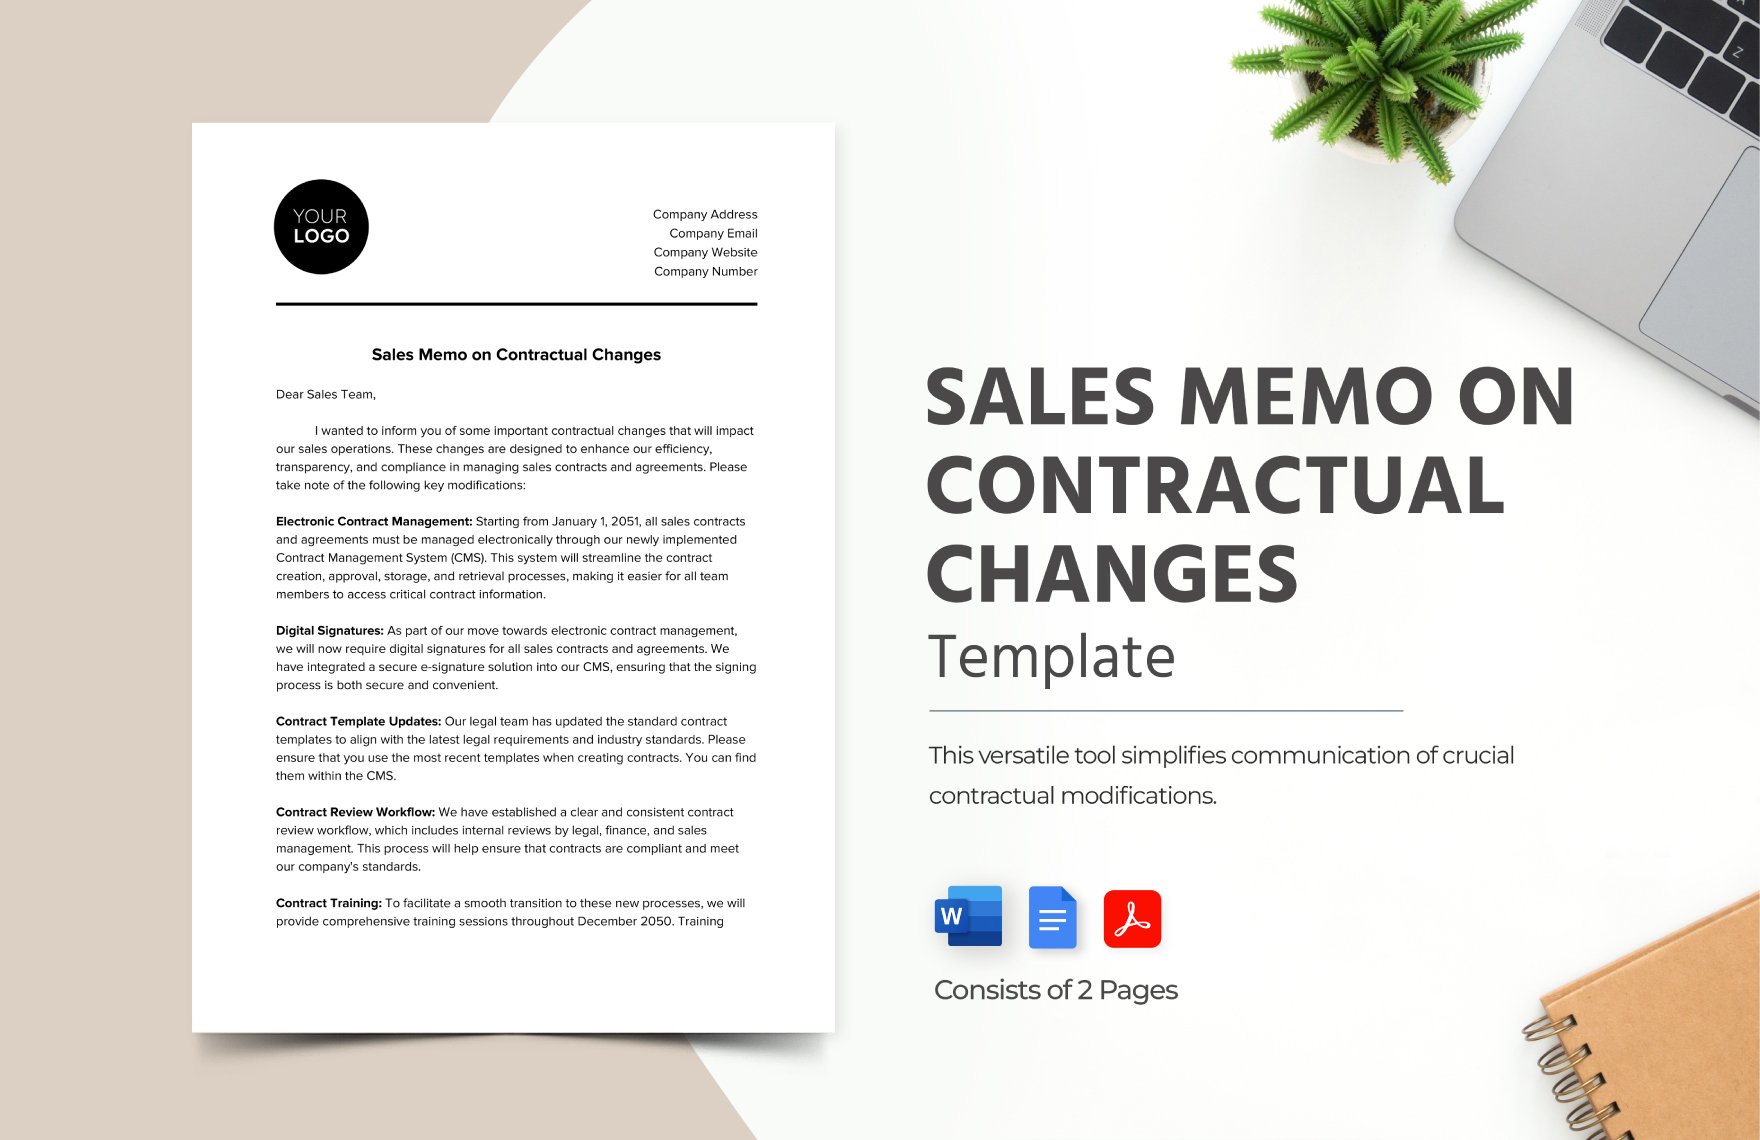 Sales Memo on Contractual Changes Template